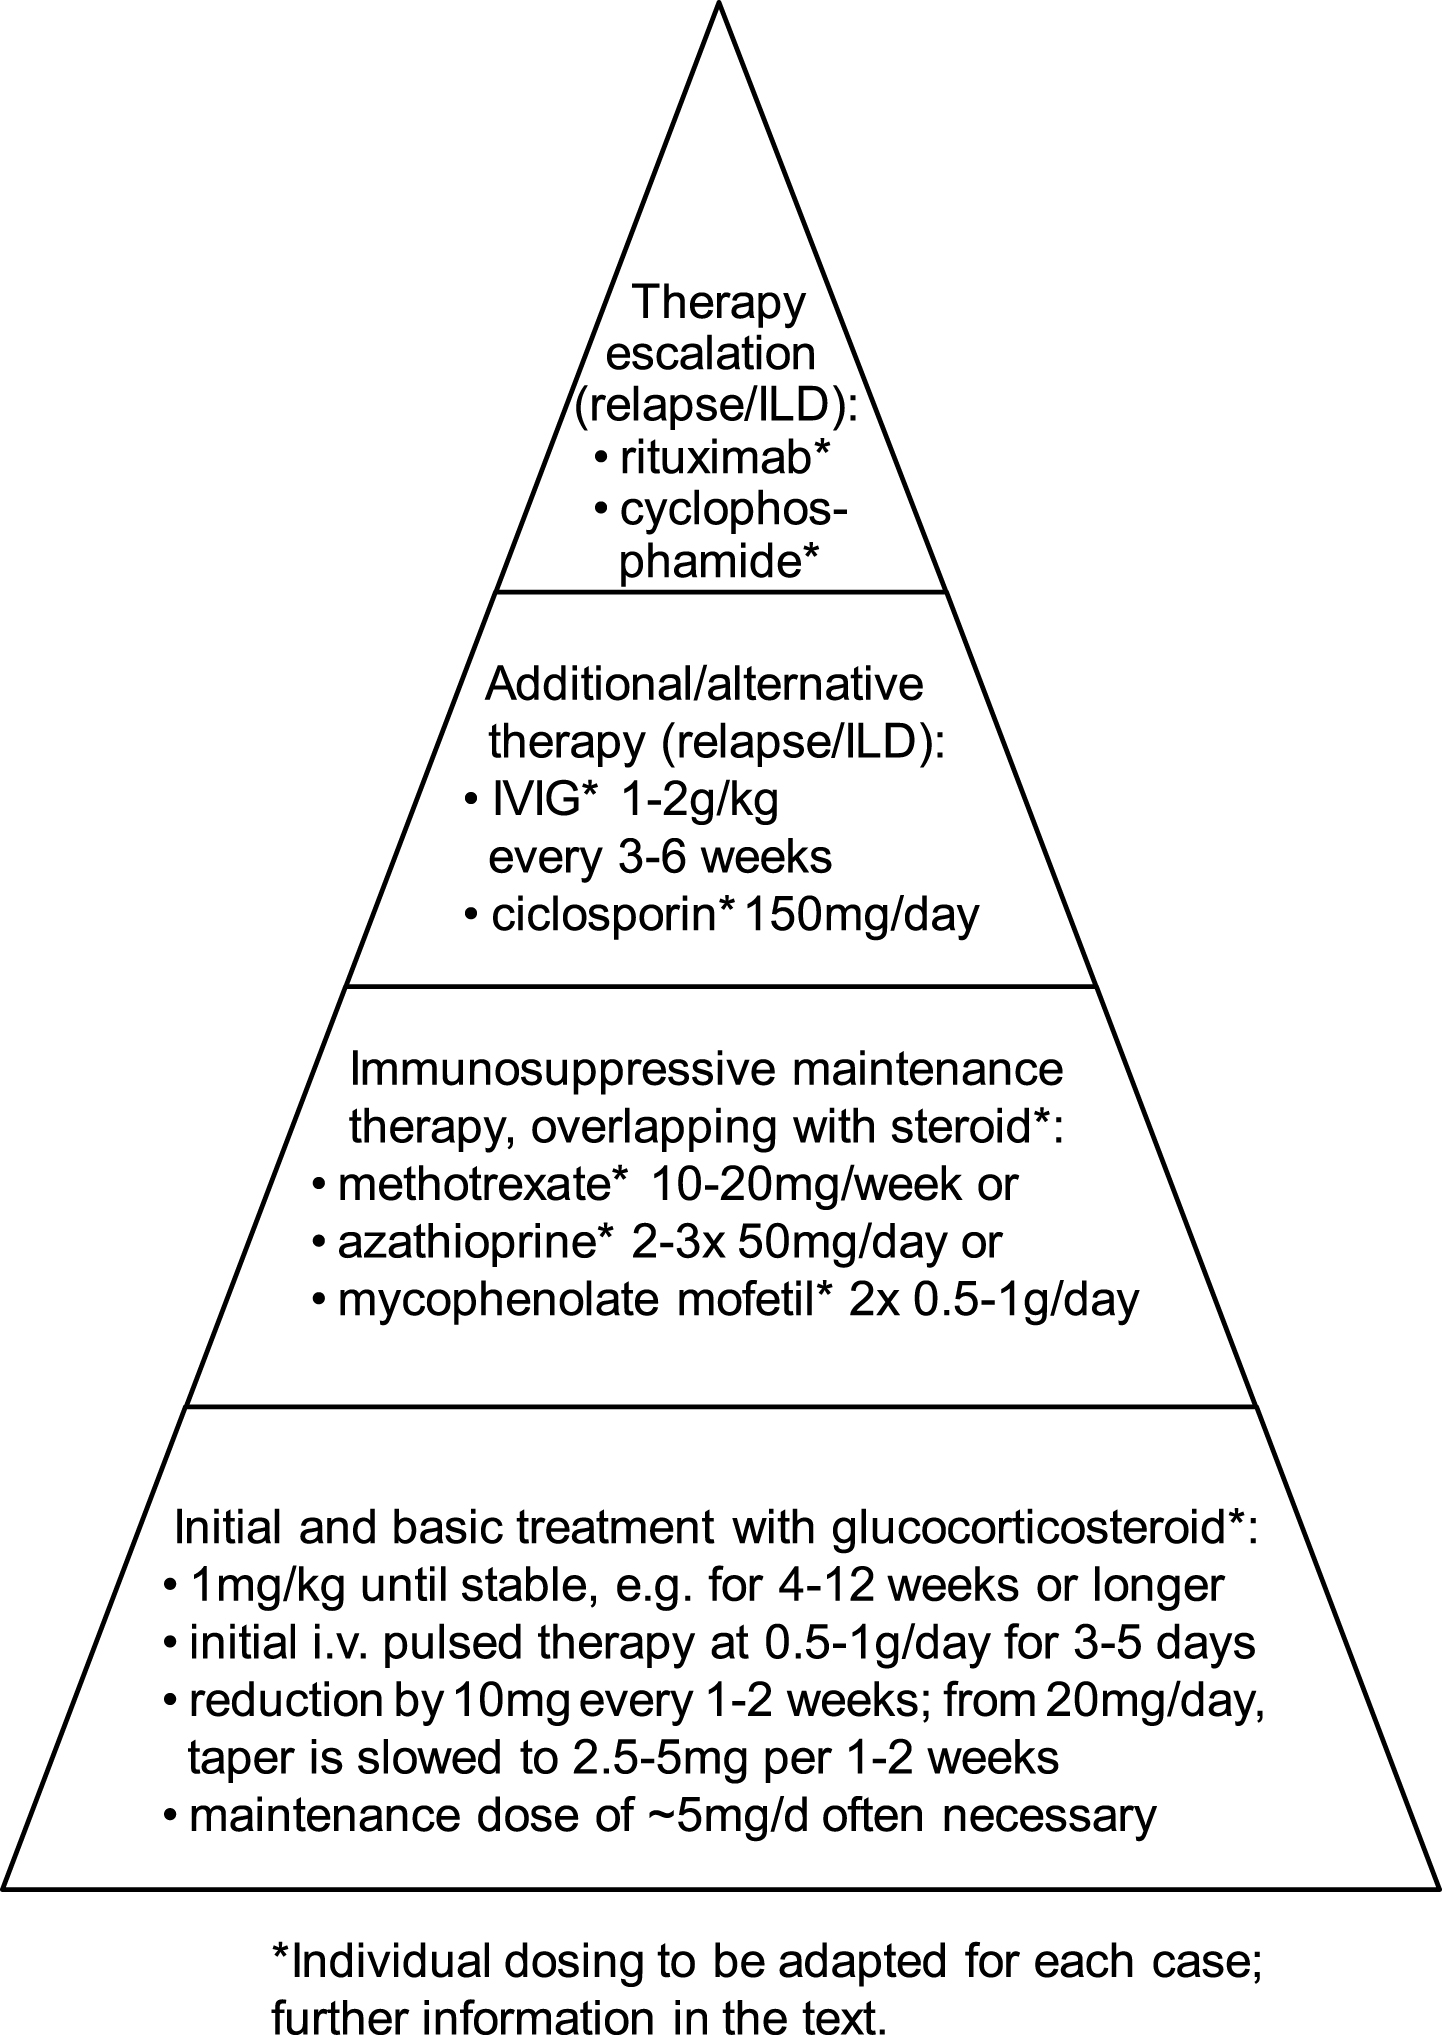 Overview of the basic and escalating treatment modalities in myositis (modified from [1]).